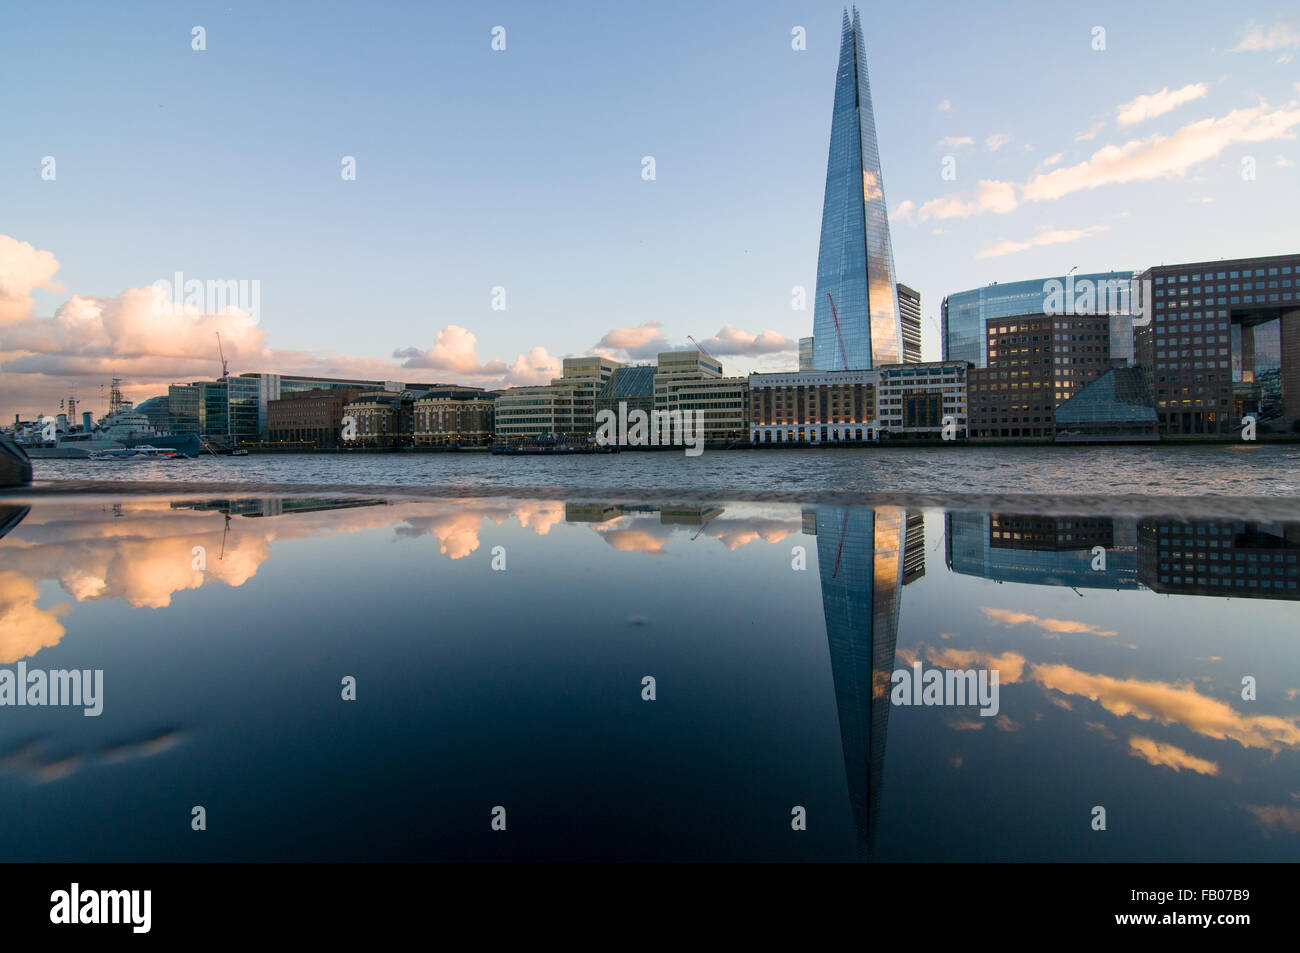 Reflection of the Shard in water, London Stock Photo